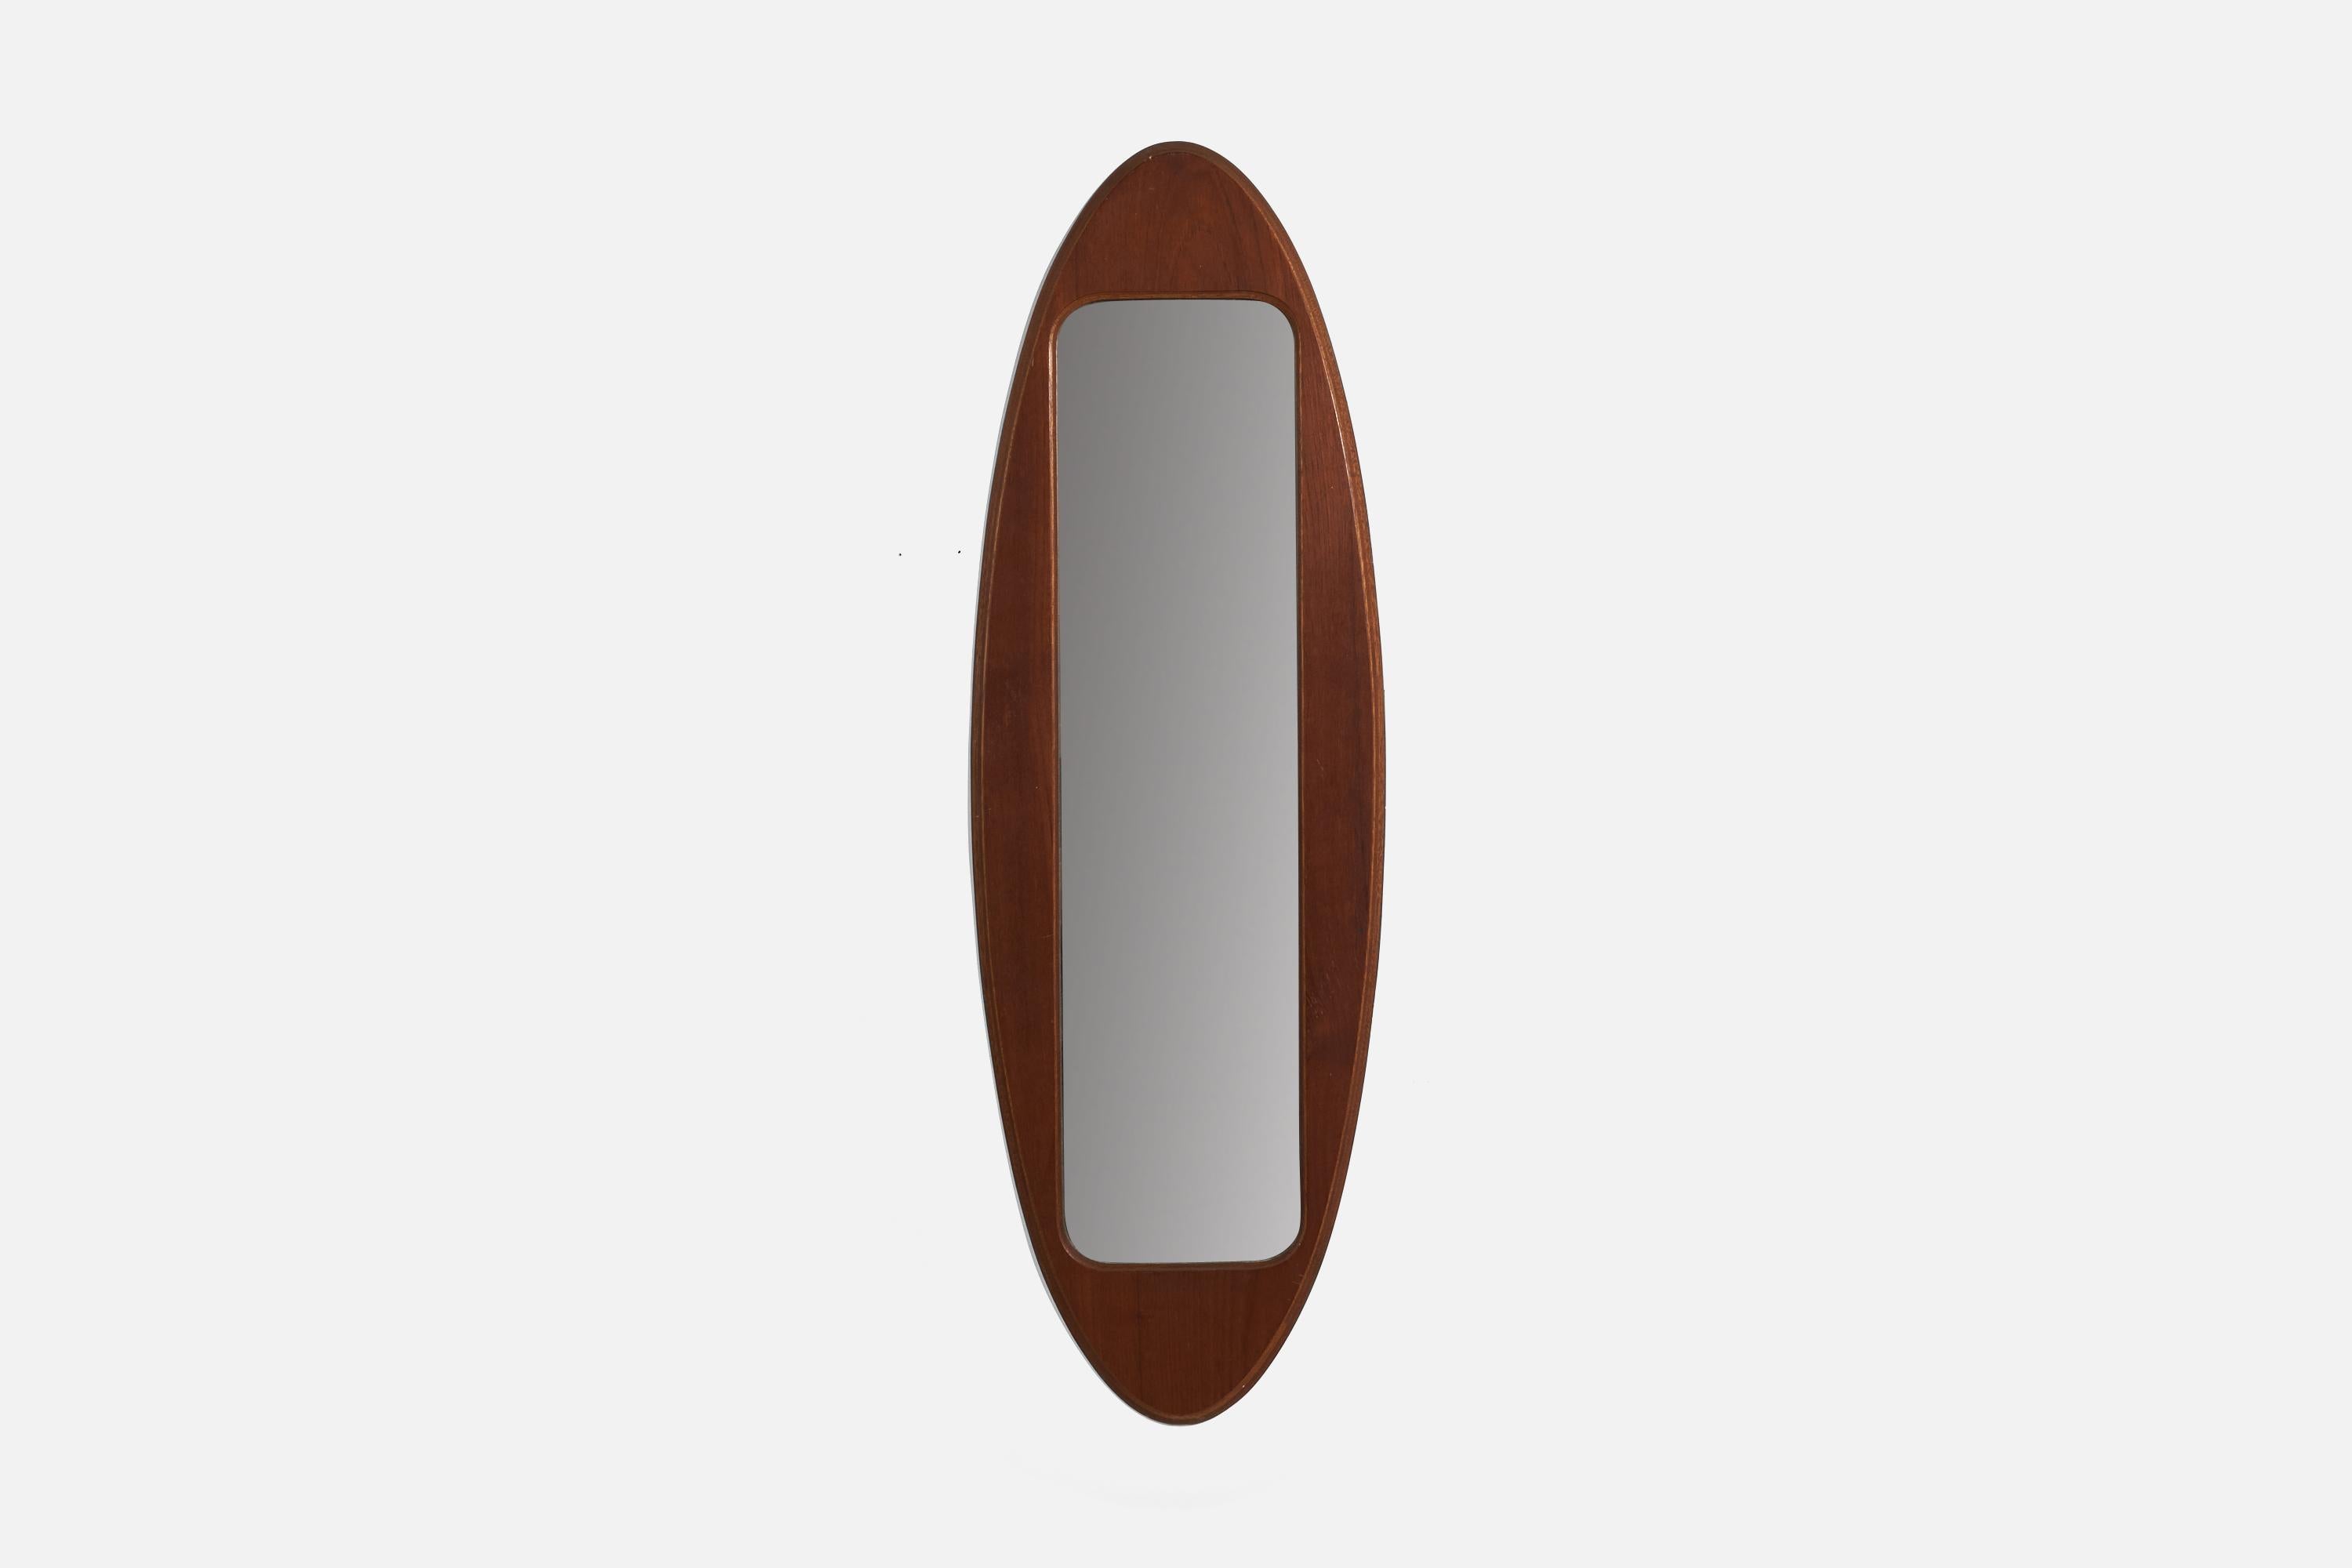 A teak wall mirror designed and produced in Italy, 1950s.